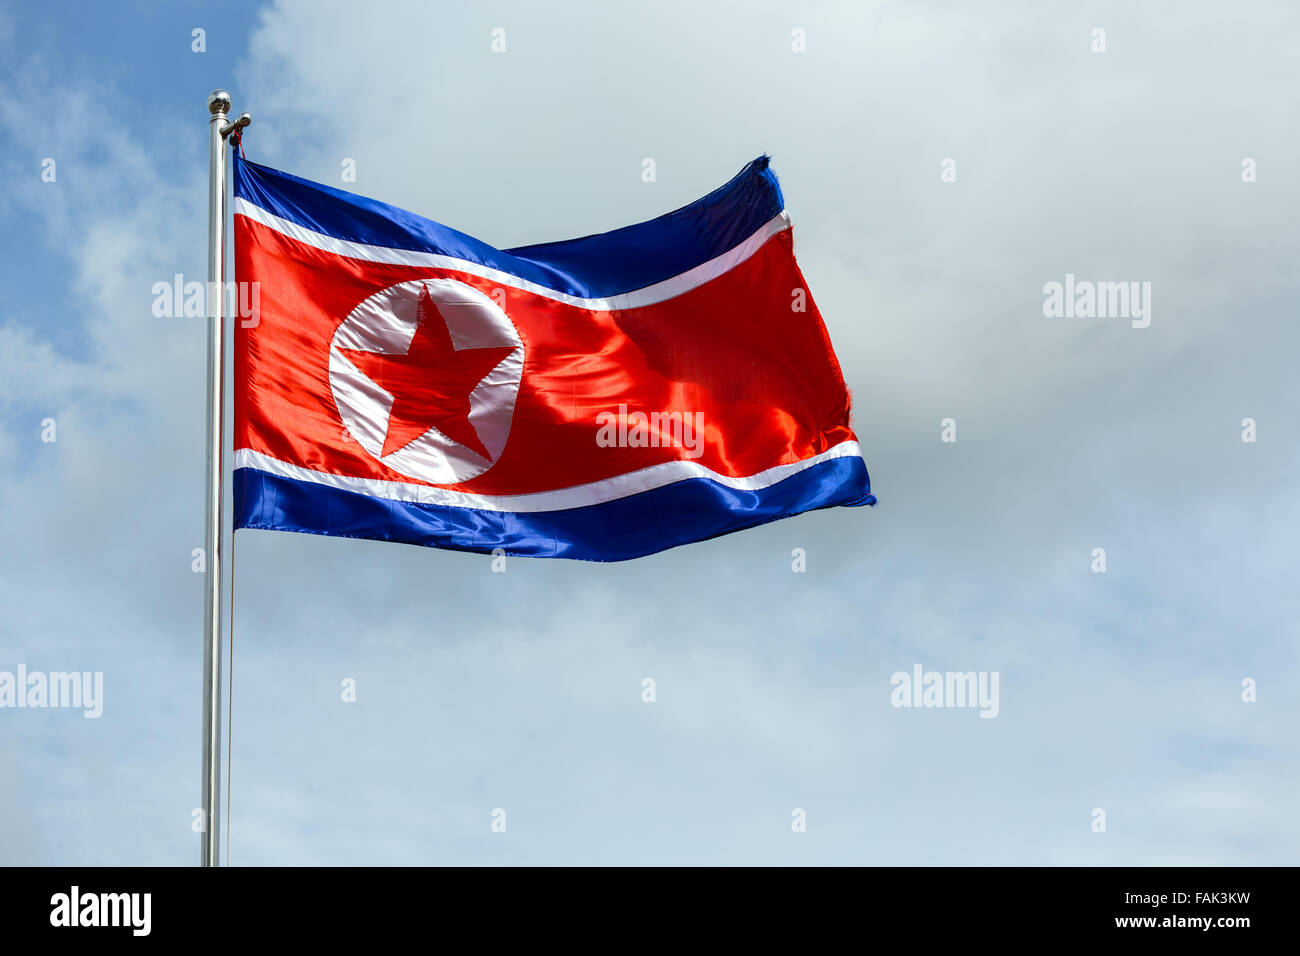 North Korea flag blowing in the wind Stock Photo